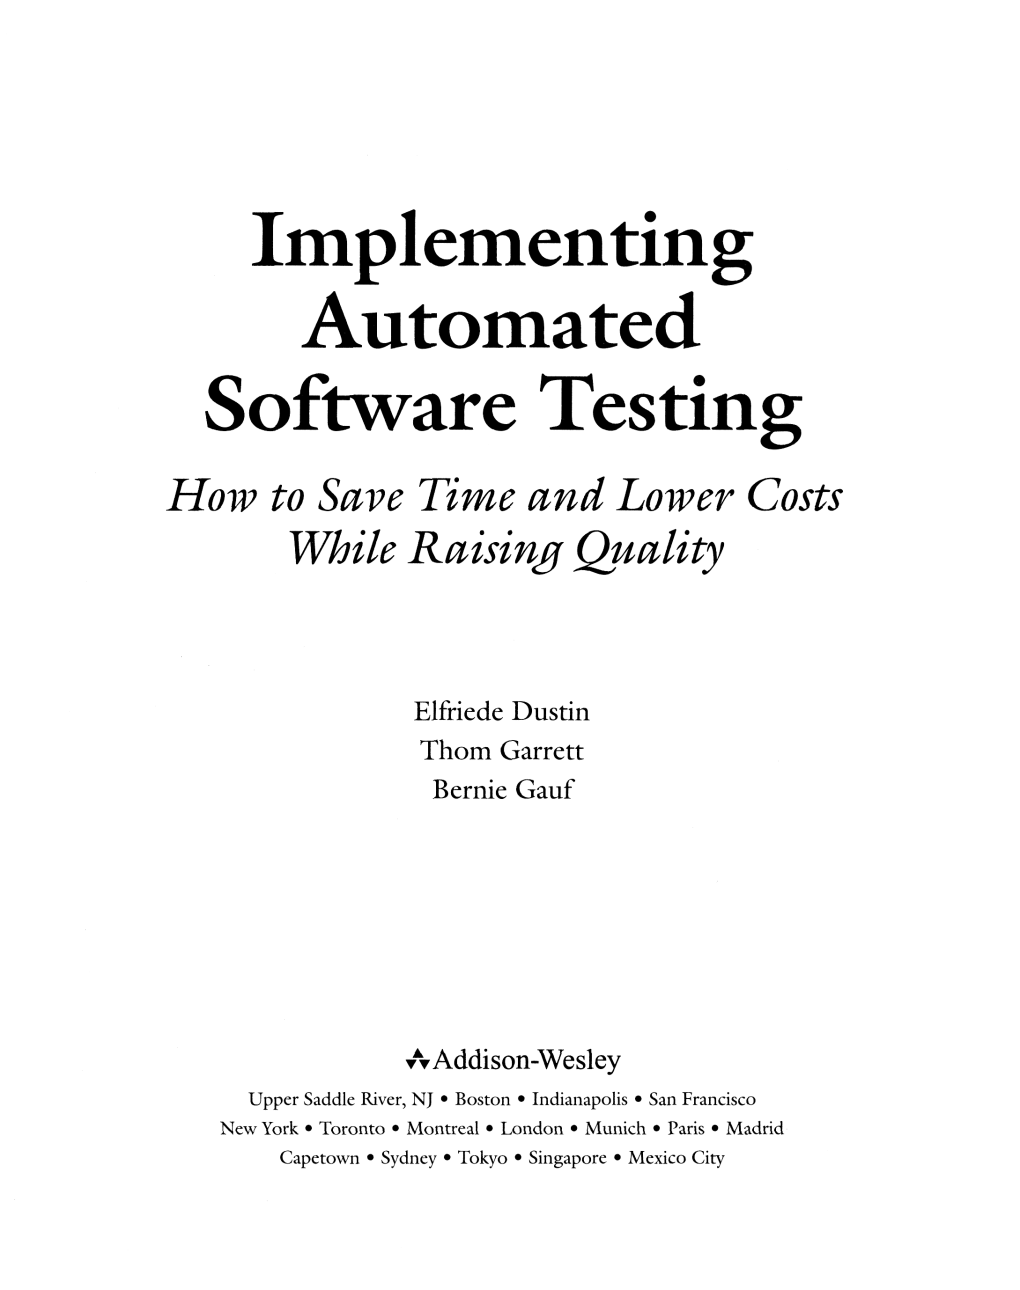 Implementing Automated Software Testing How to Save Time and Lower Costs While Raising Quality